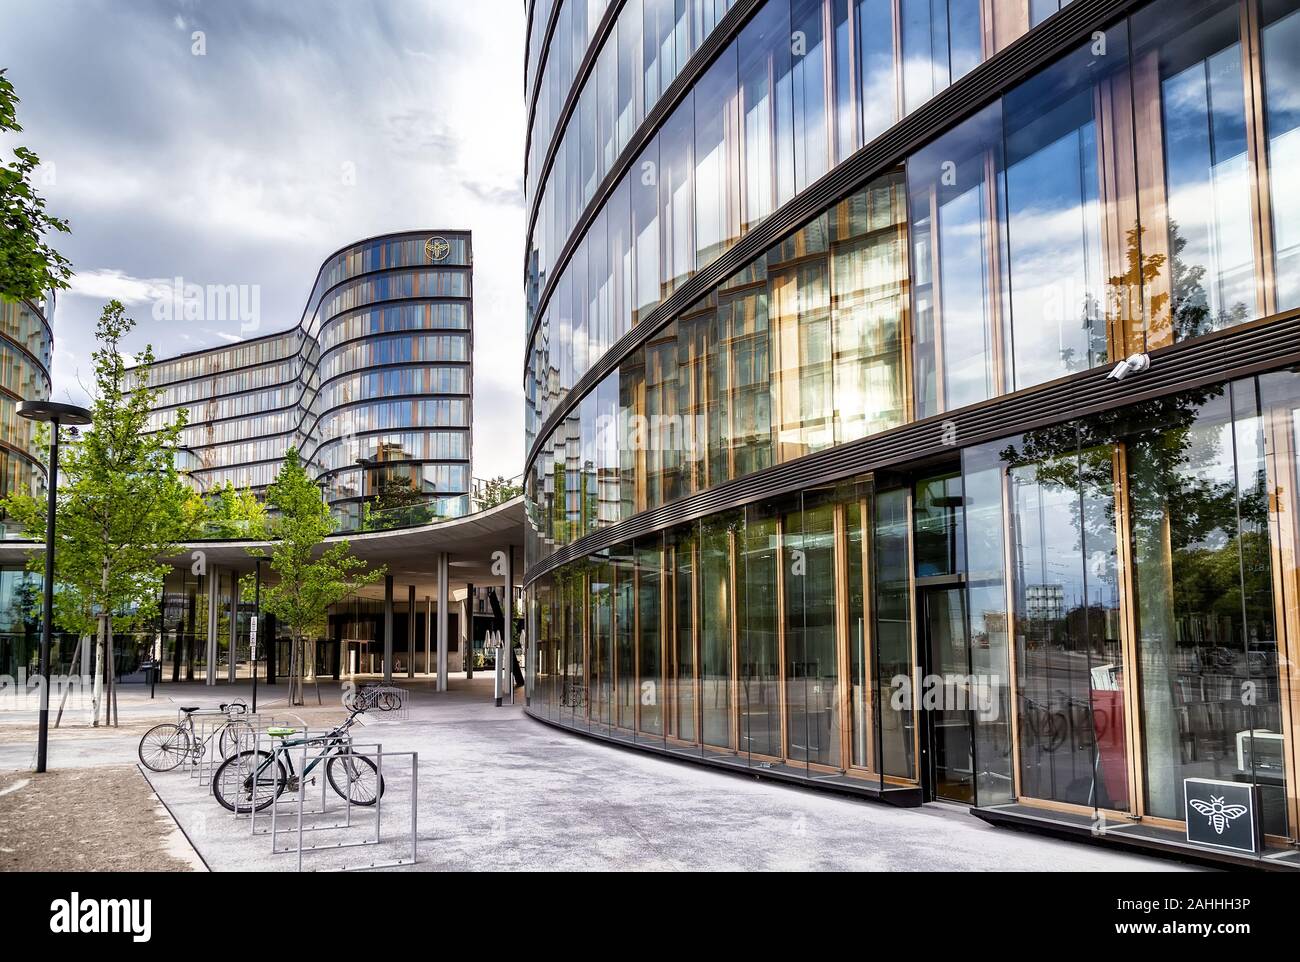 Erste Campus Belvedere modern buildings development site in central Vienna, The new district will feature an urban mix of office,residential building. Stock Photo